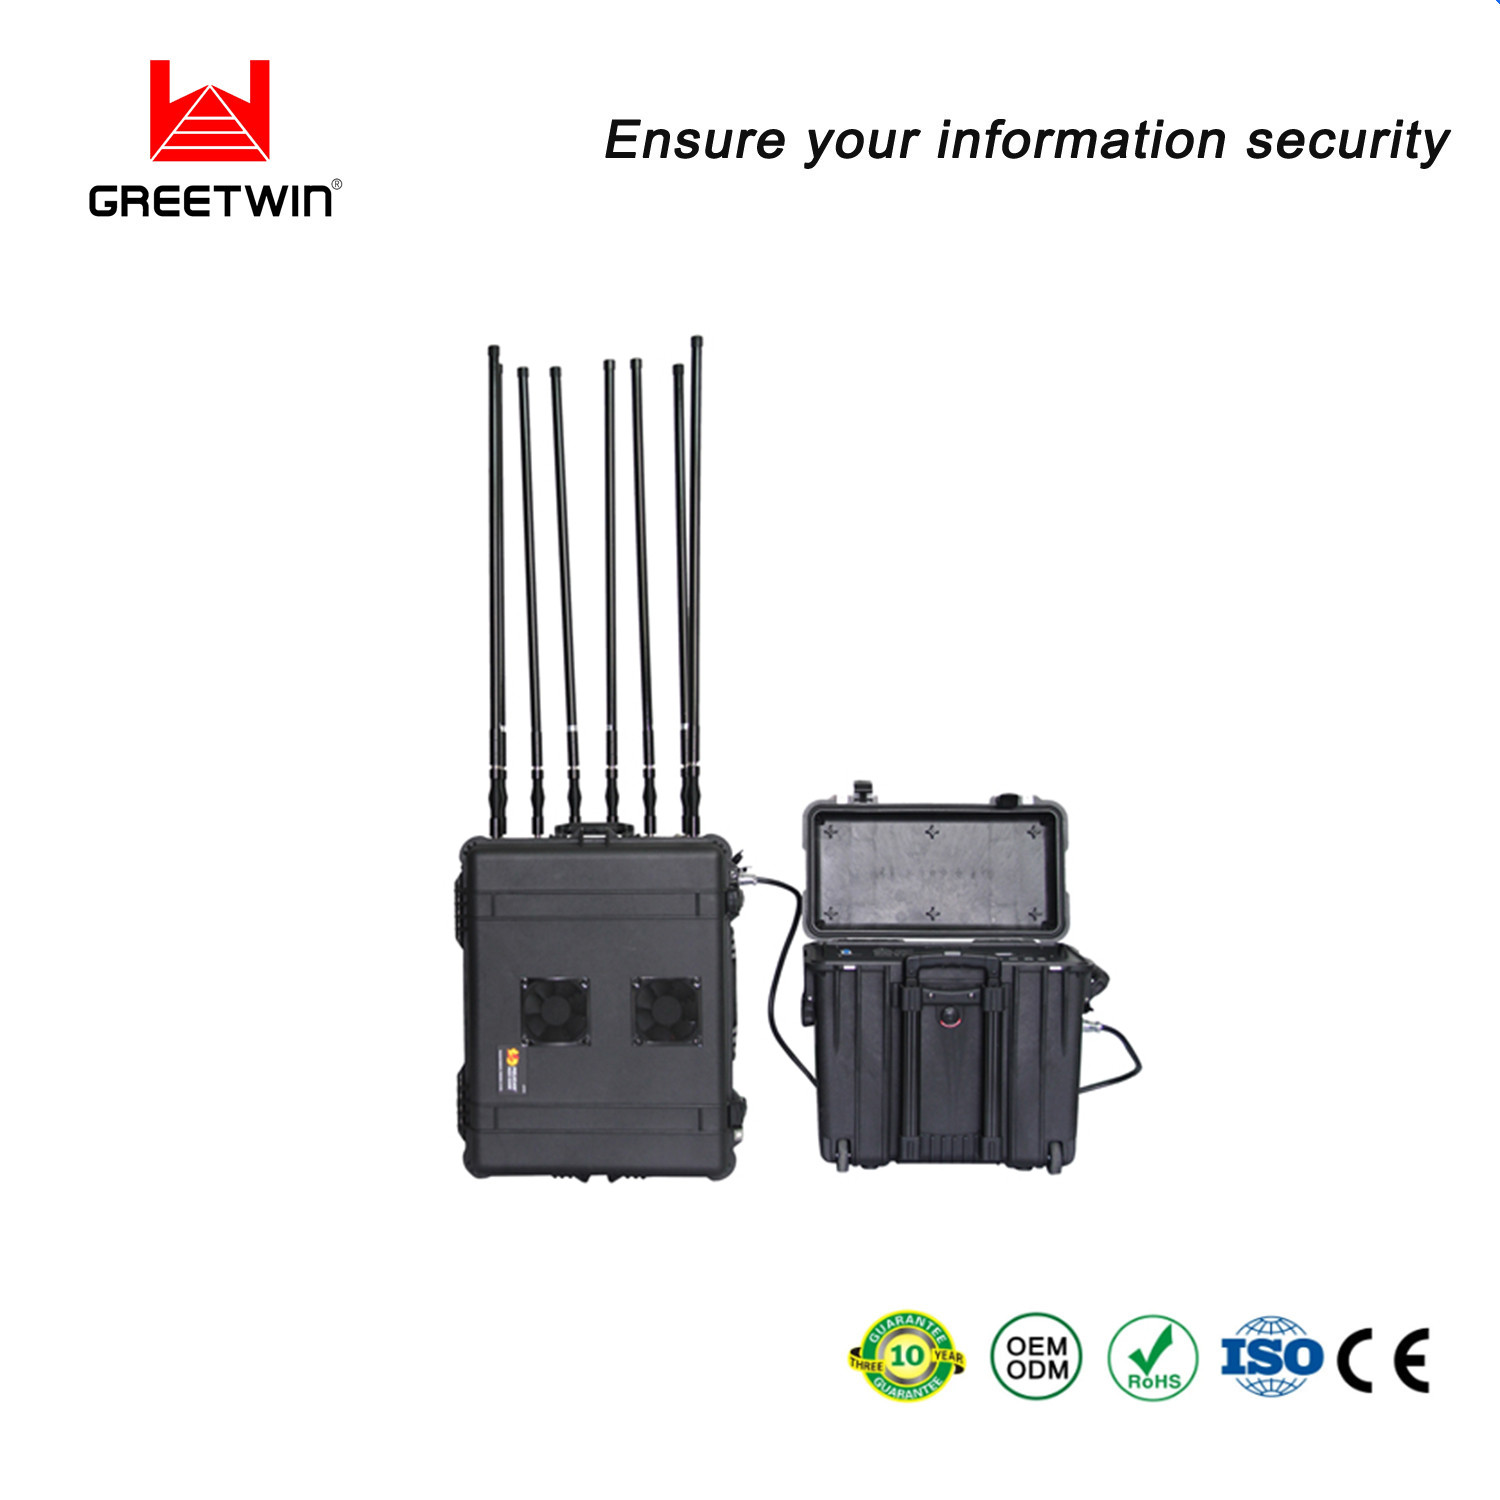 ps35057556-portable_rcied_mobile_phone_jammer_dds_360w_8_bands_rj485_protocol.jpg